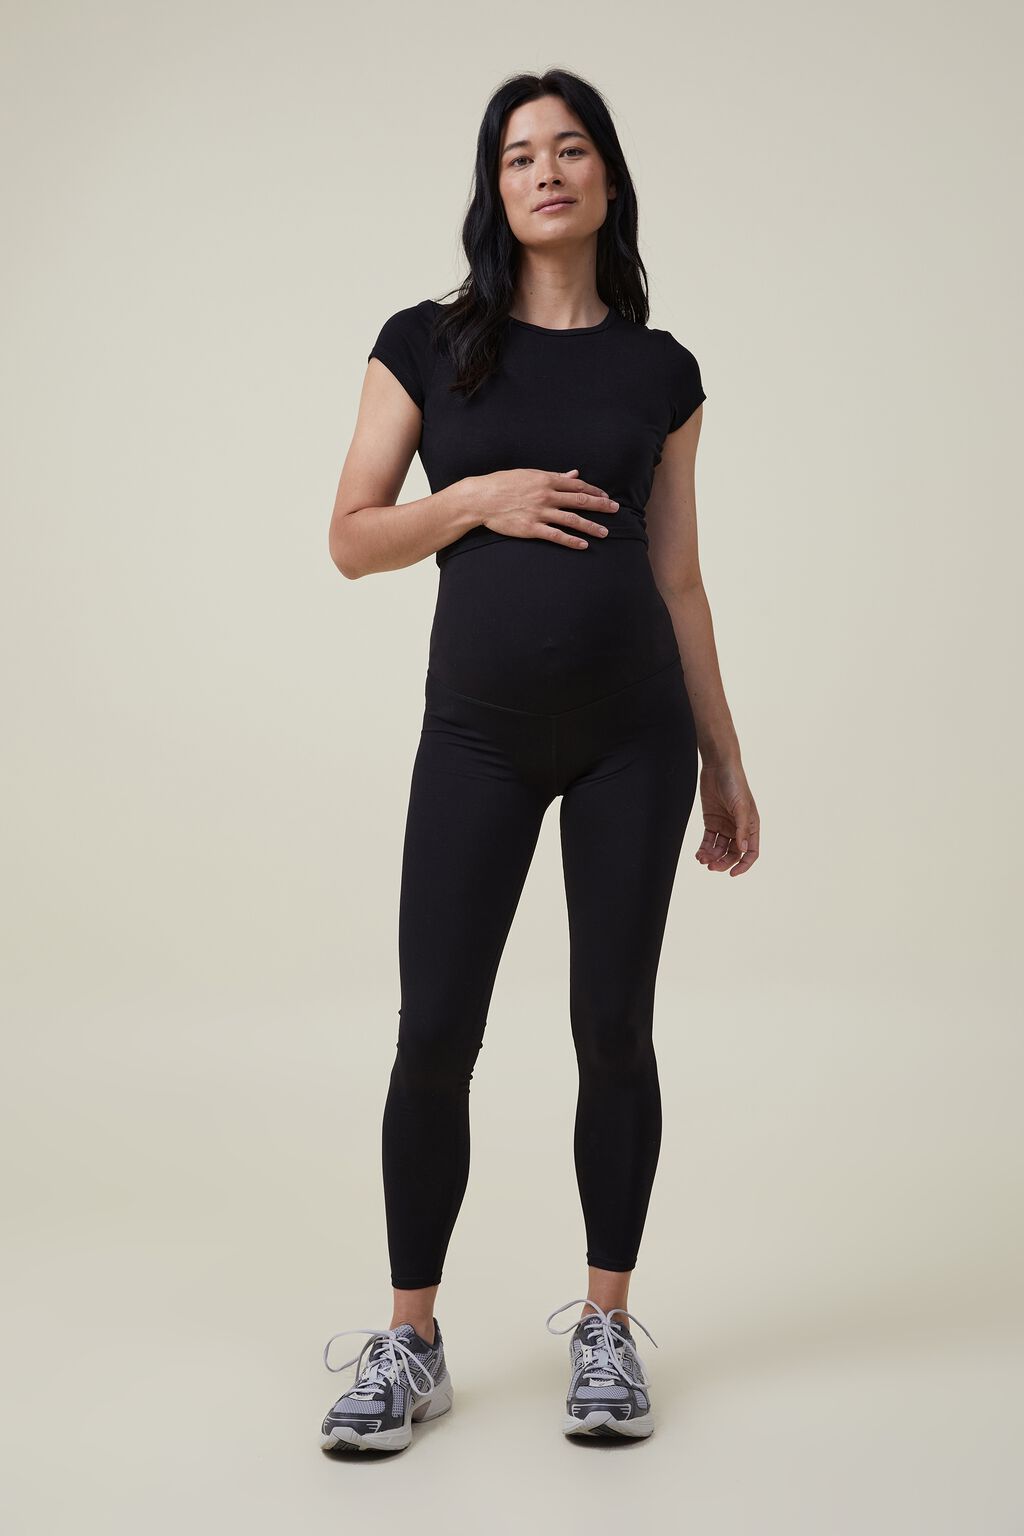 Maternity Core Tight Over Belly | Women's Lifestyle Fashion Brand ...